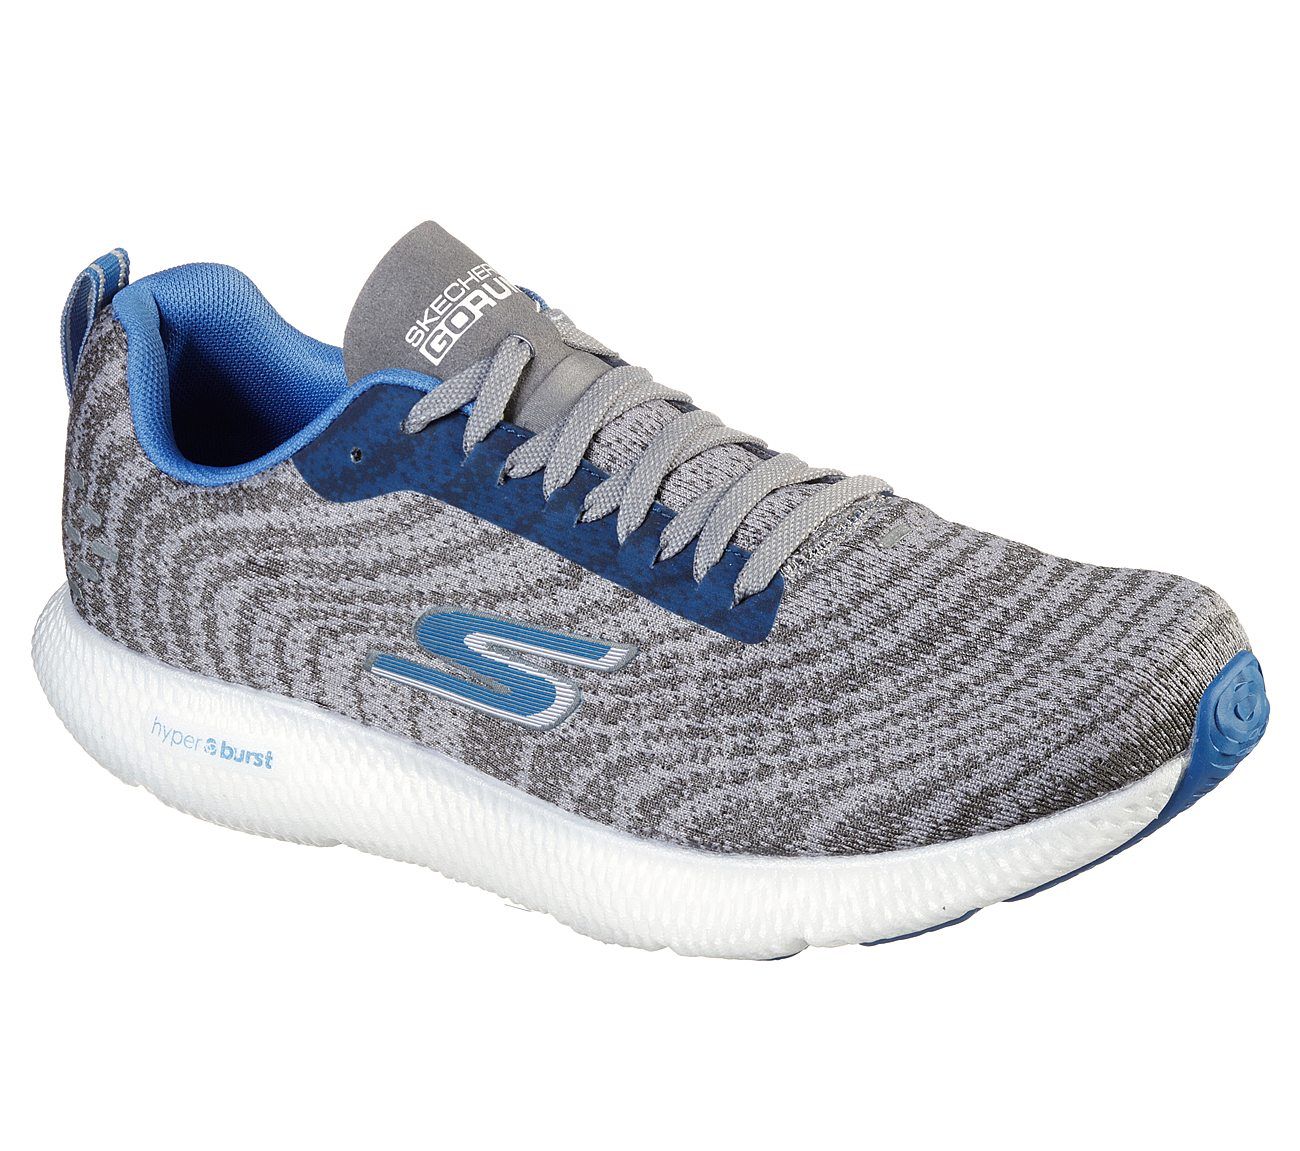 do skechers run large or small